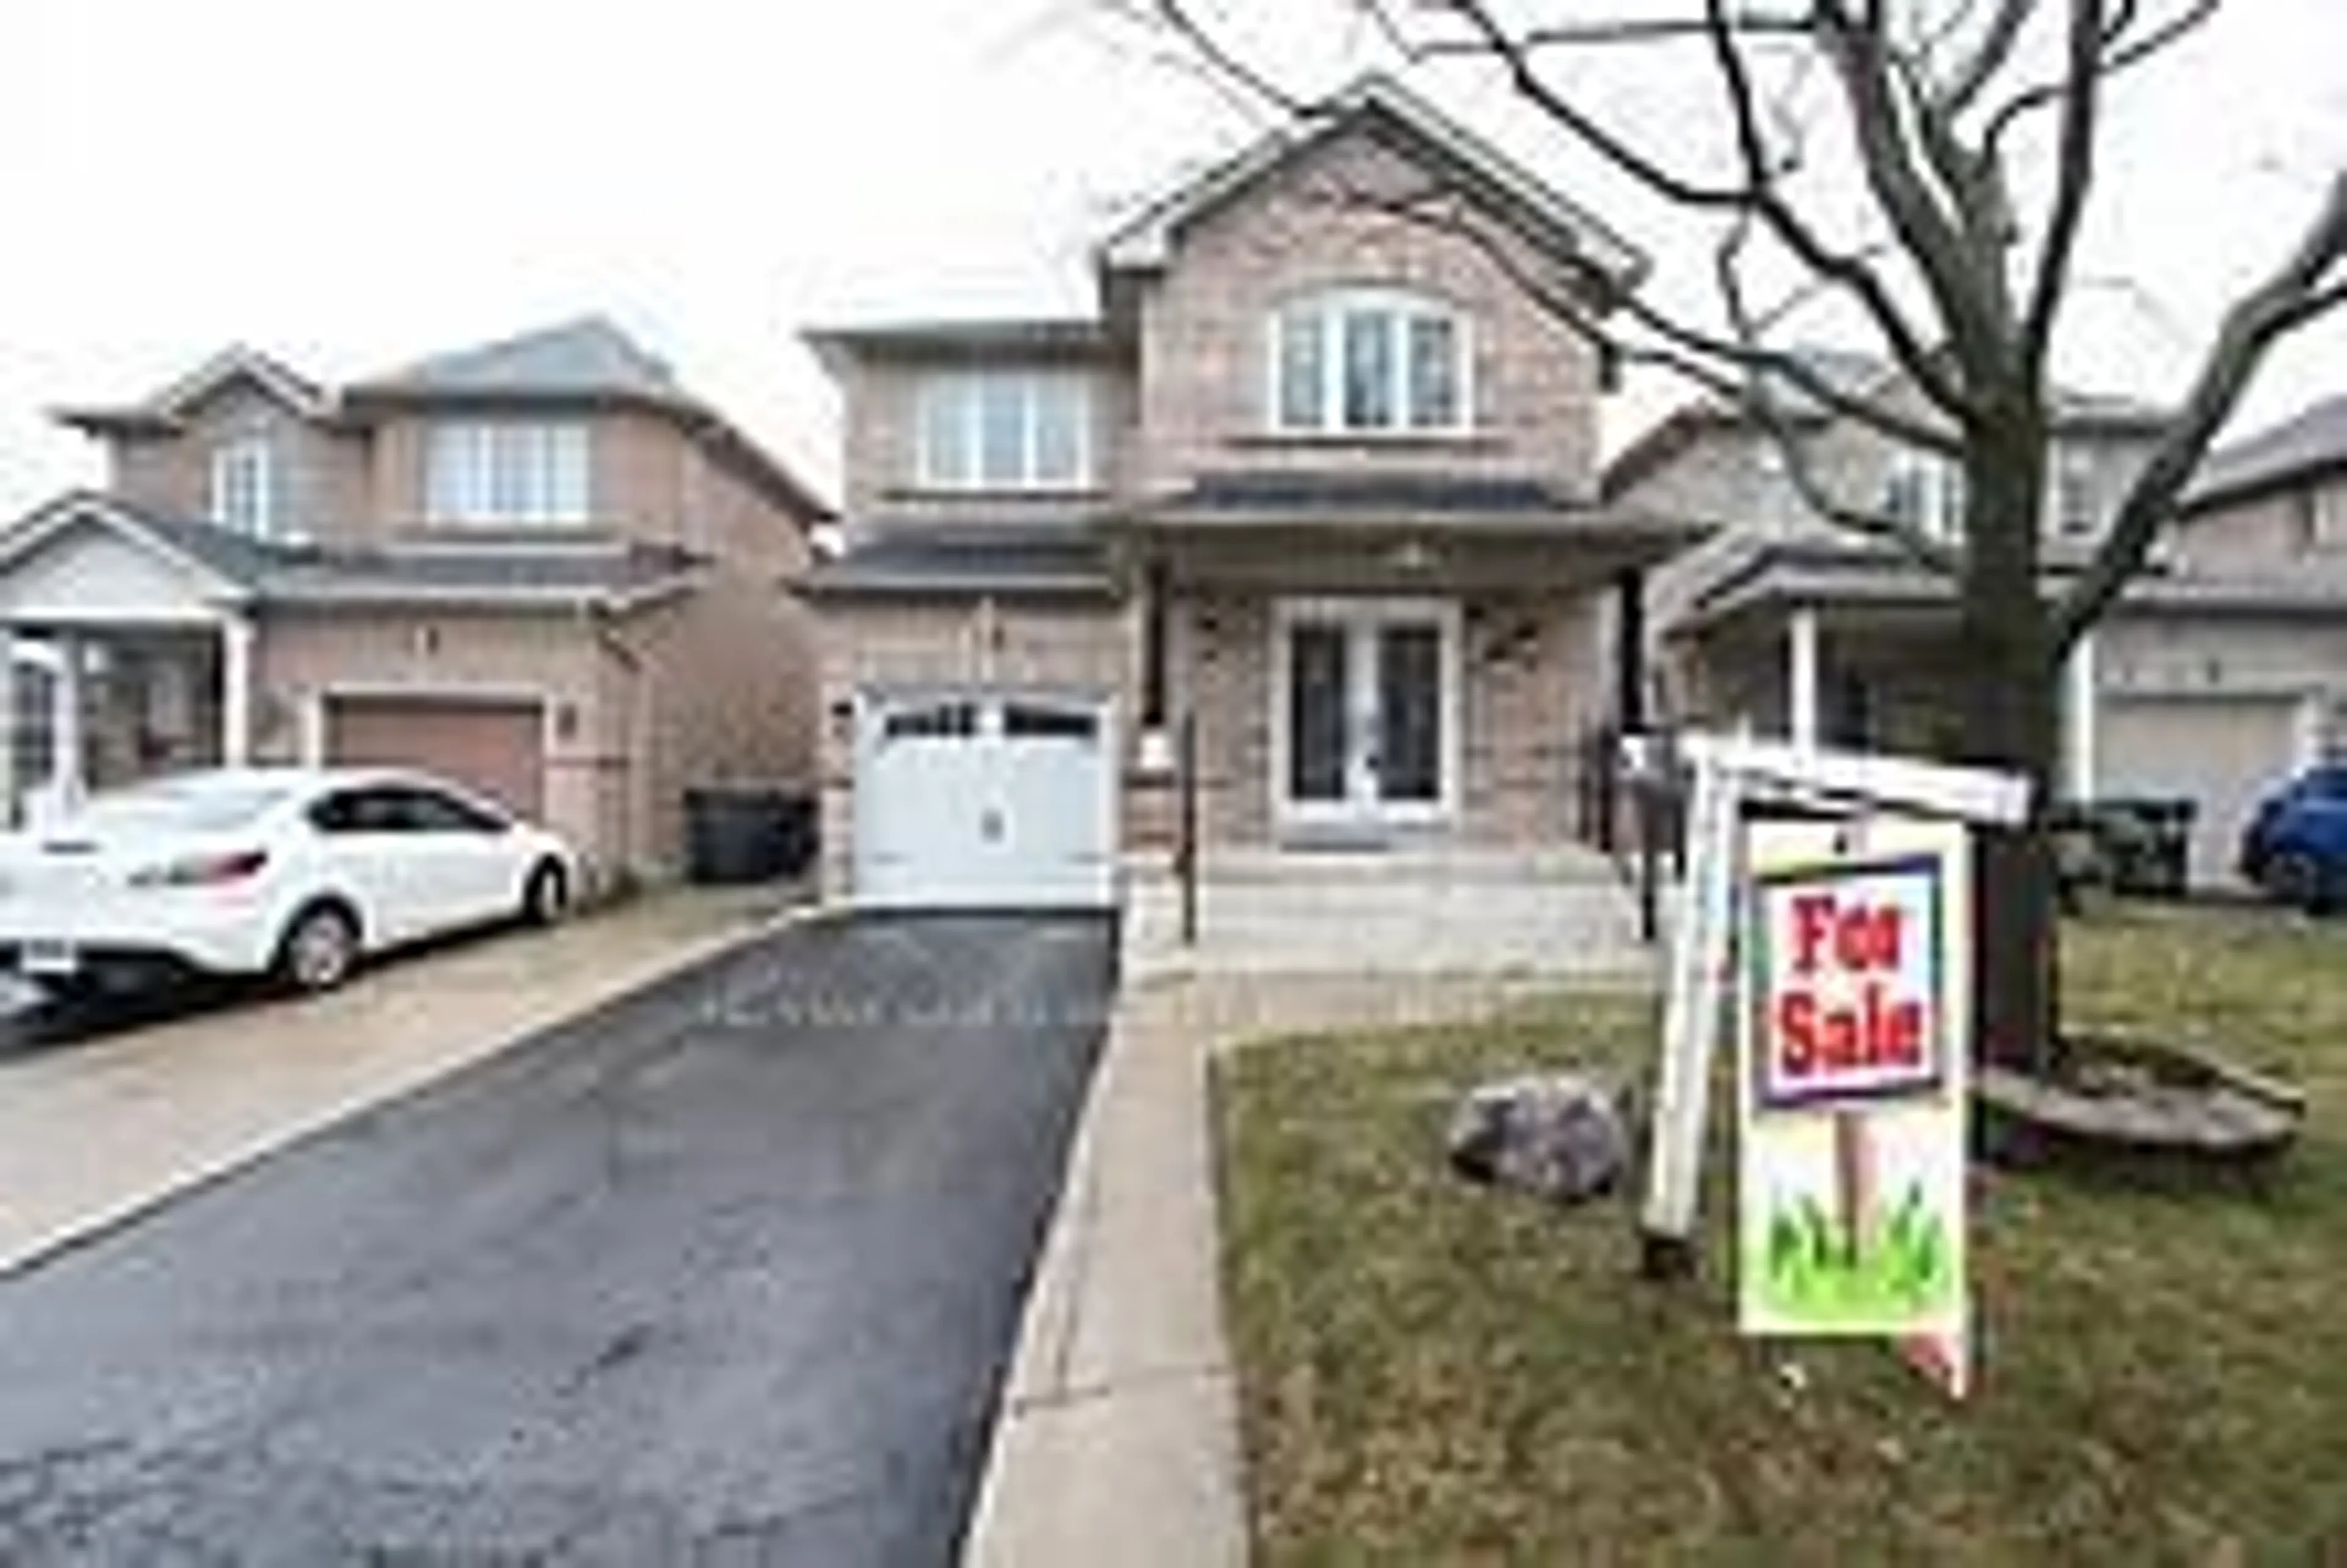 Frontside or backside of a home for 3 Oakmeadow Dr, Brampton Ontario L6A 2L7